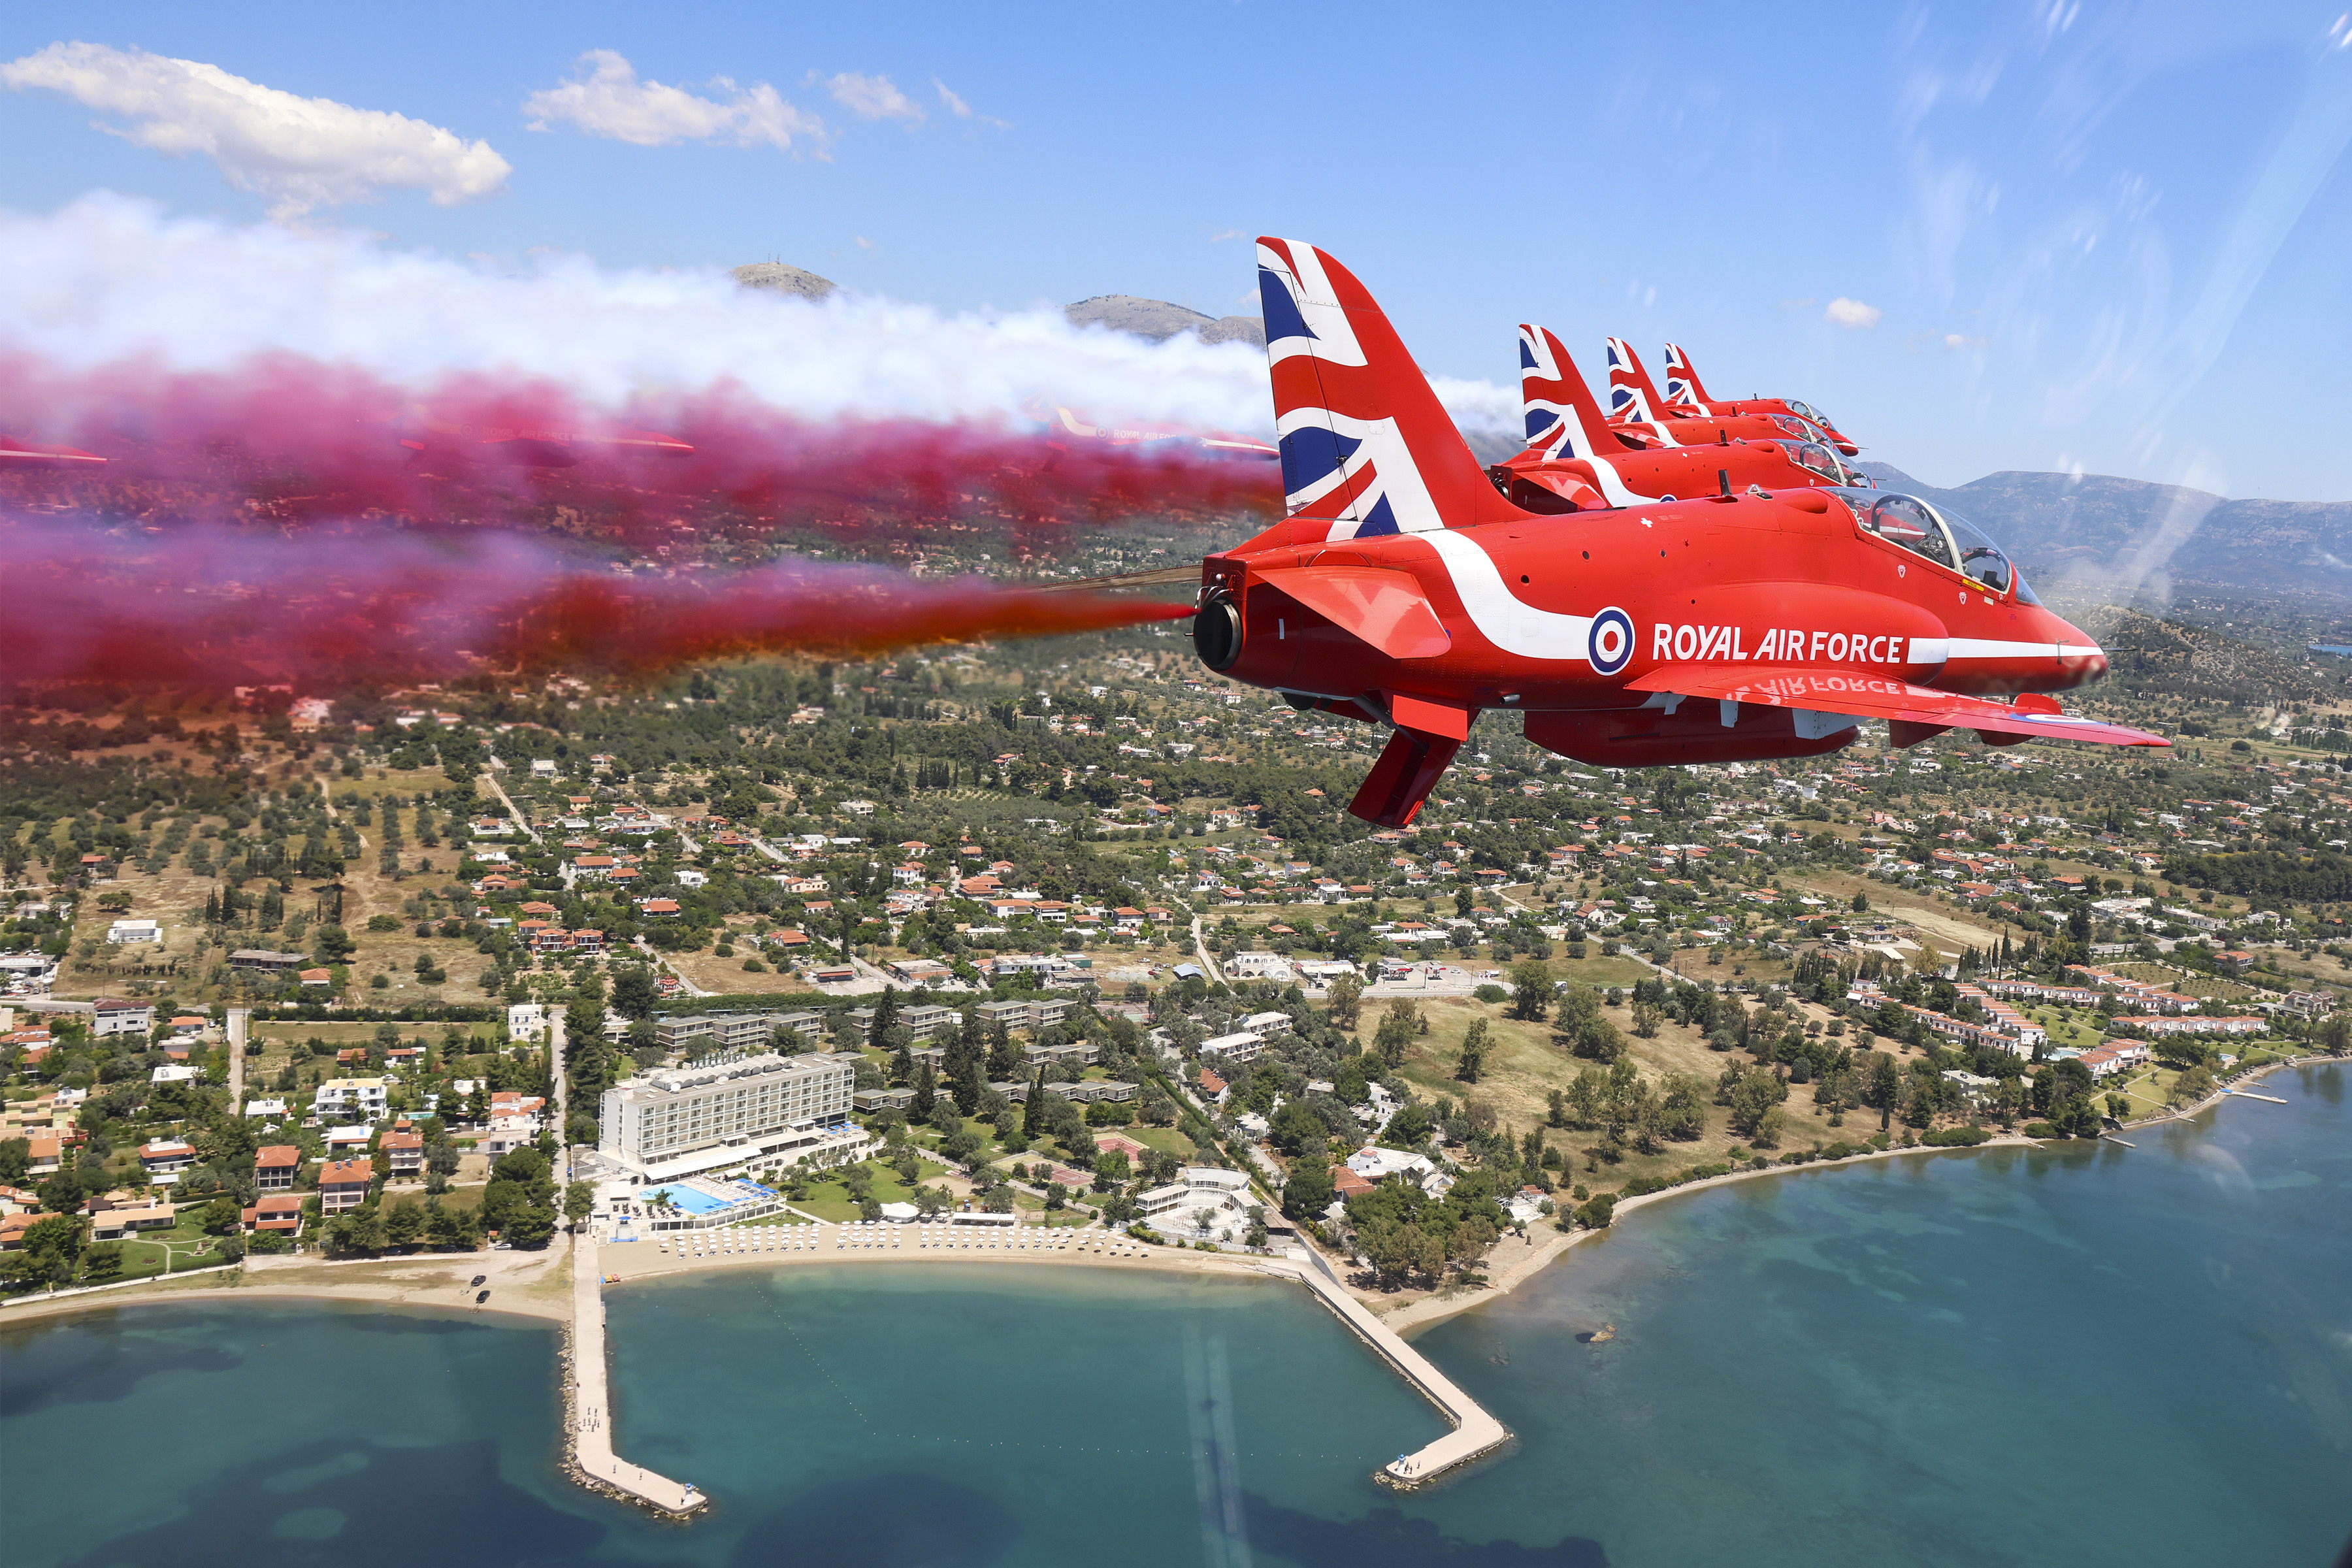 The Red Arrows complete pre-season training in Greece ahead of a busy 2022 season. Image by AS1 Abigail Drewett.